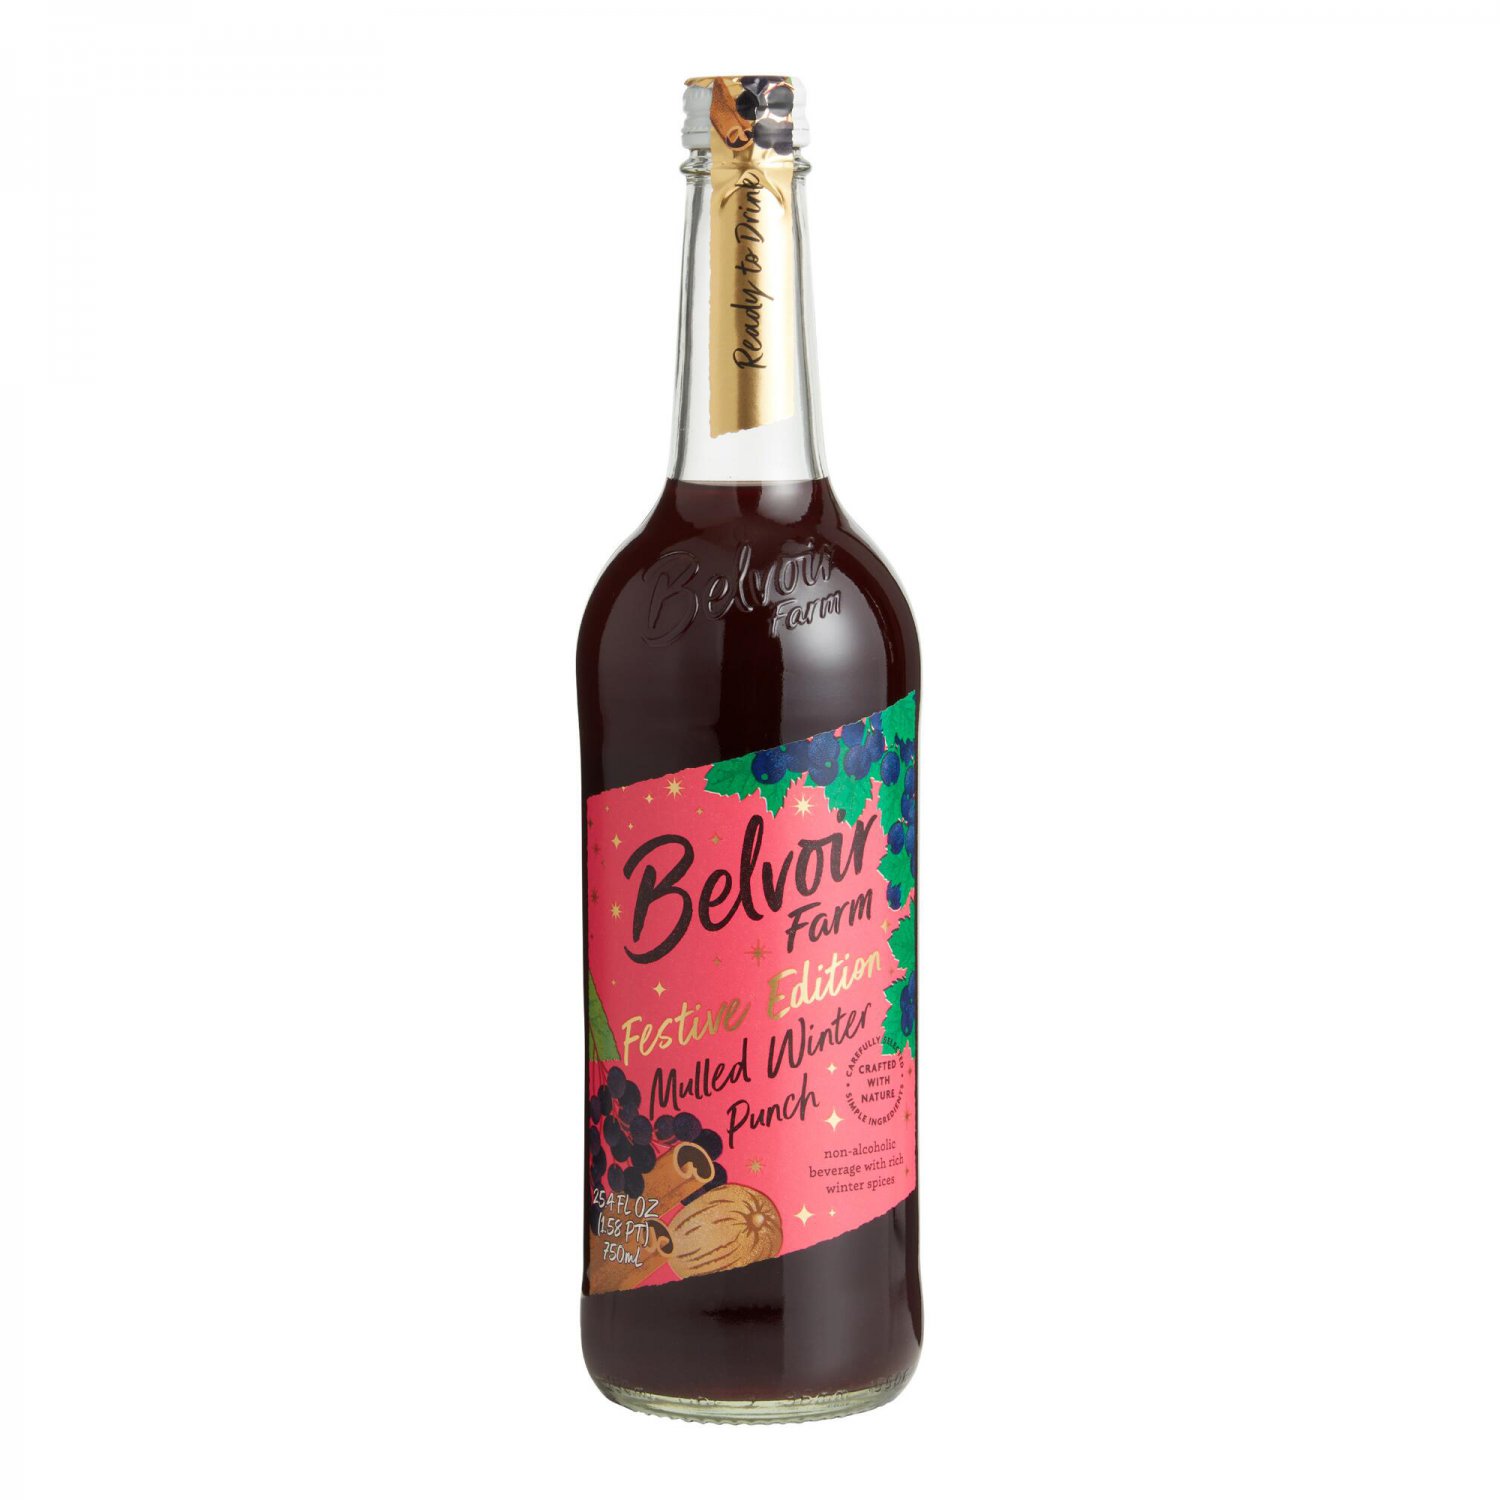 Belvoir Farm Festive Limited Edition Mulled Winter Punch 500 ml